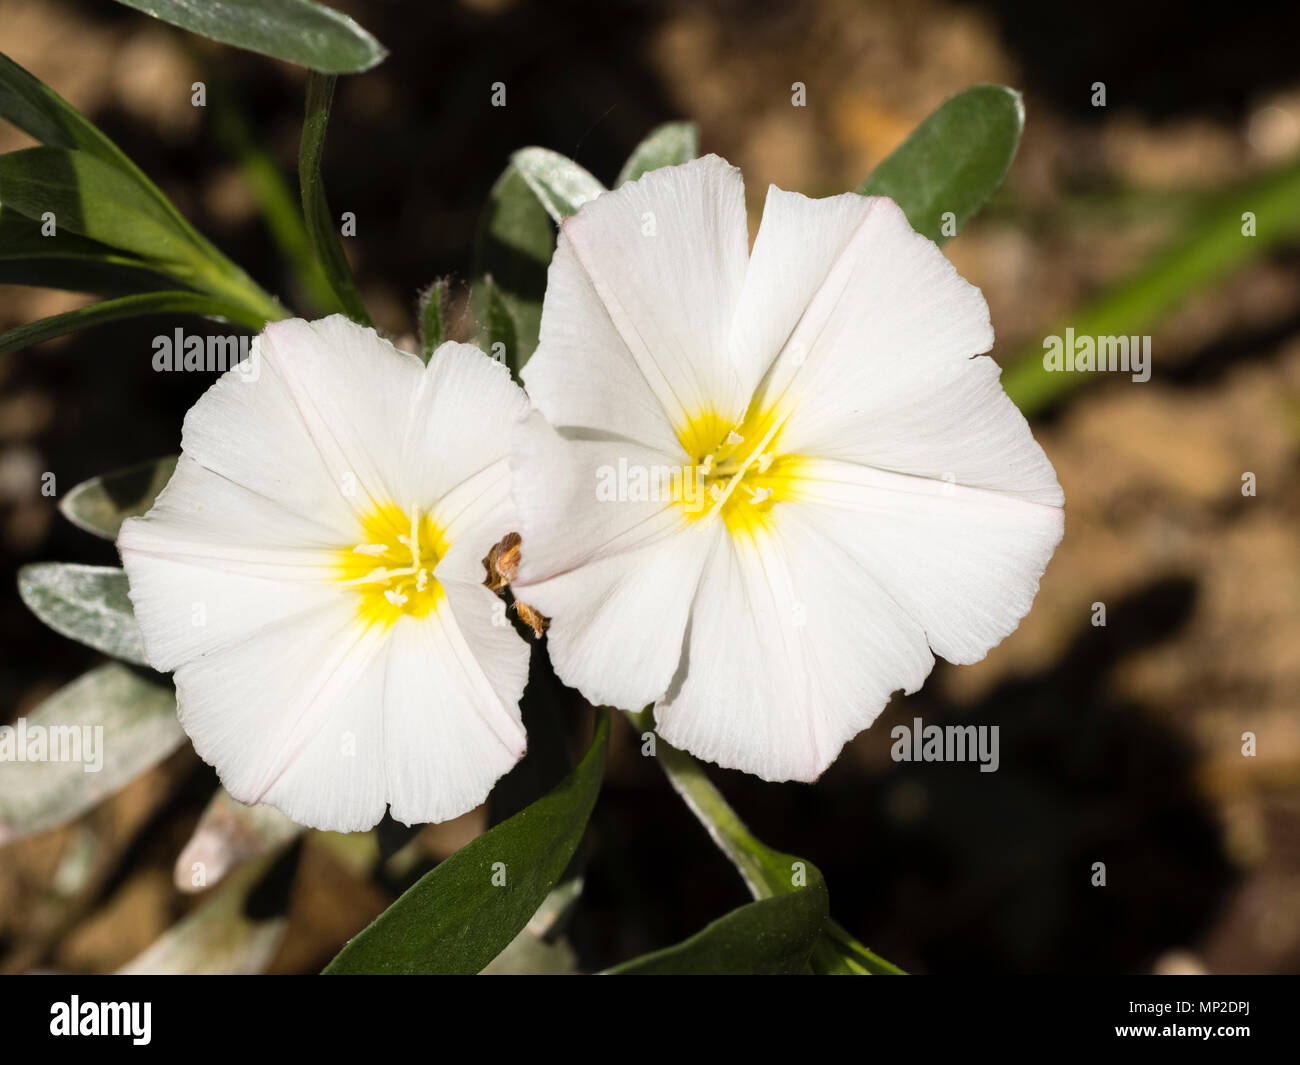 White flowers of the silvery leaved shrub, Convolvulus cneorum Stock Photo